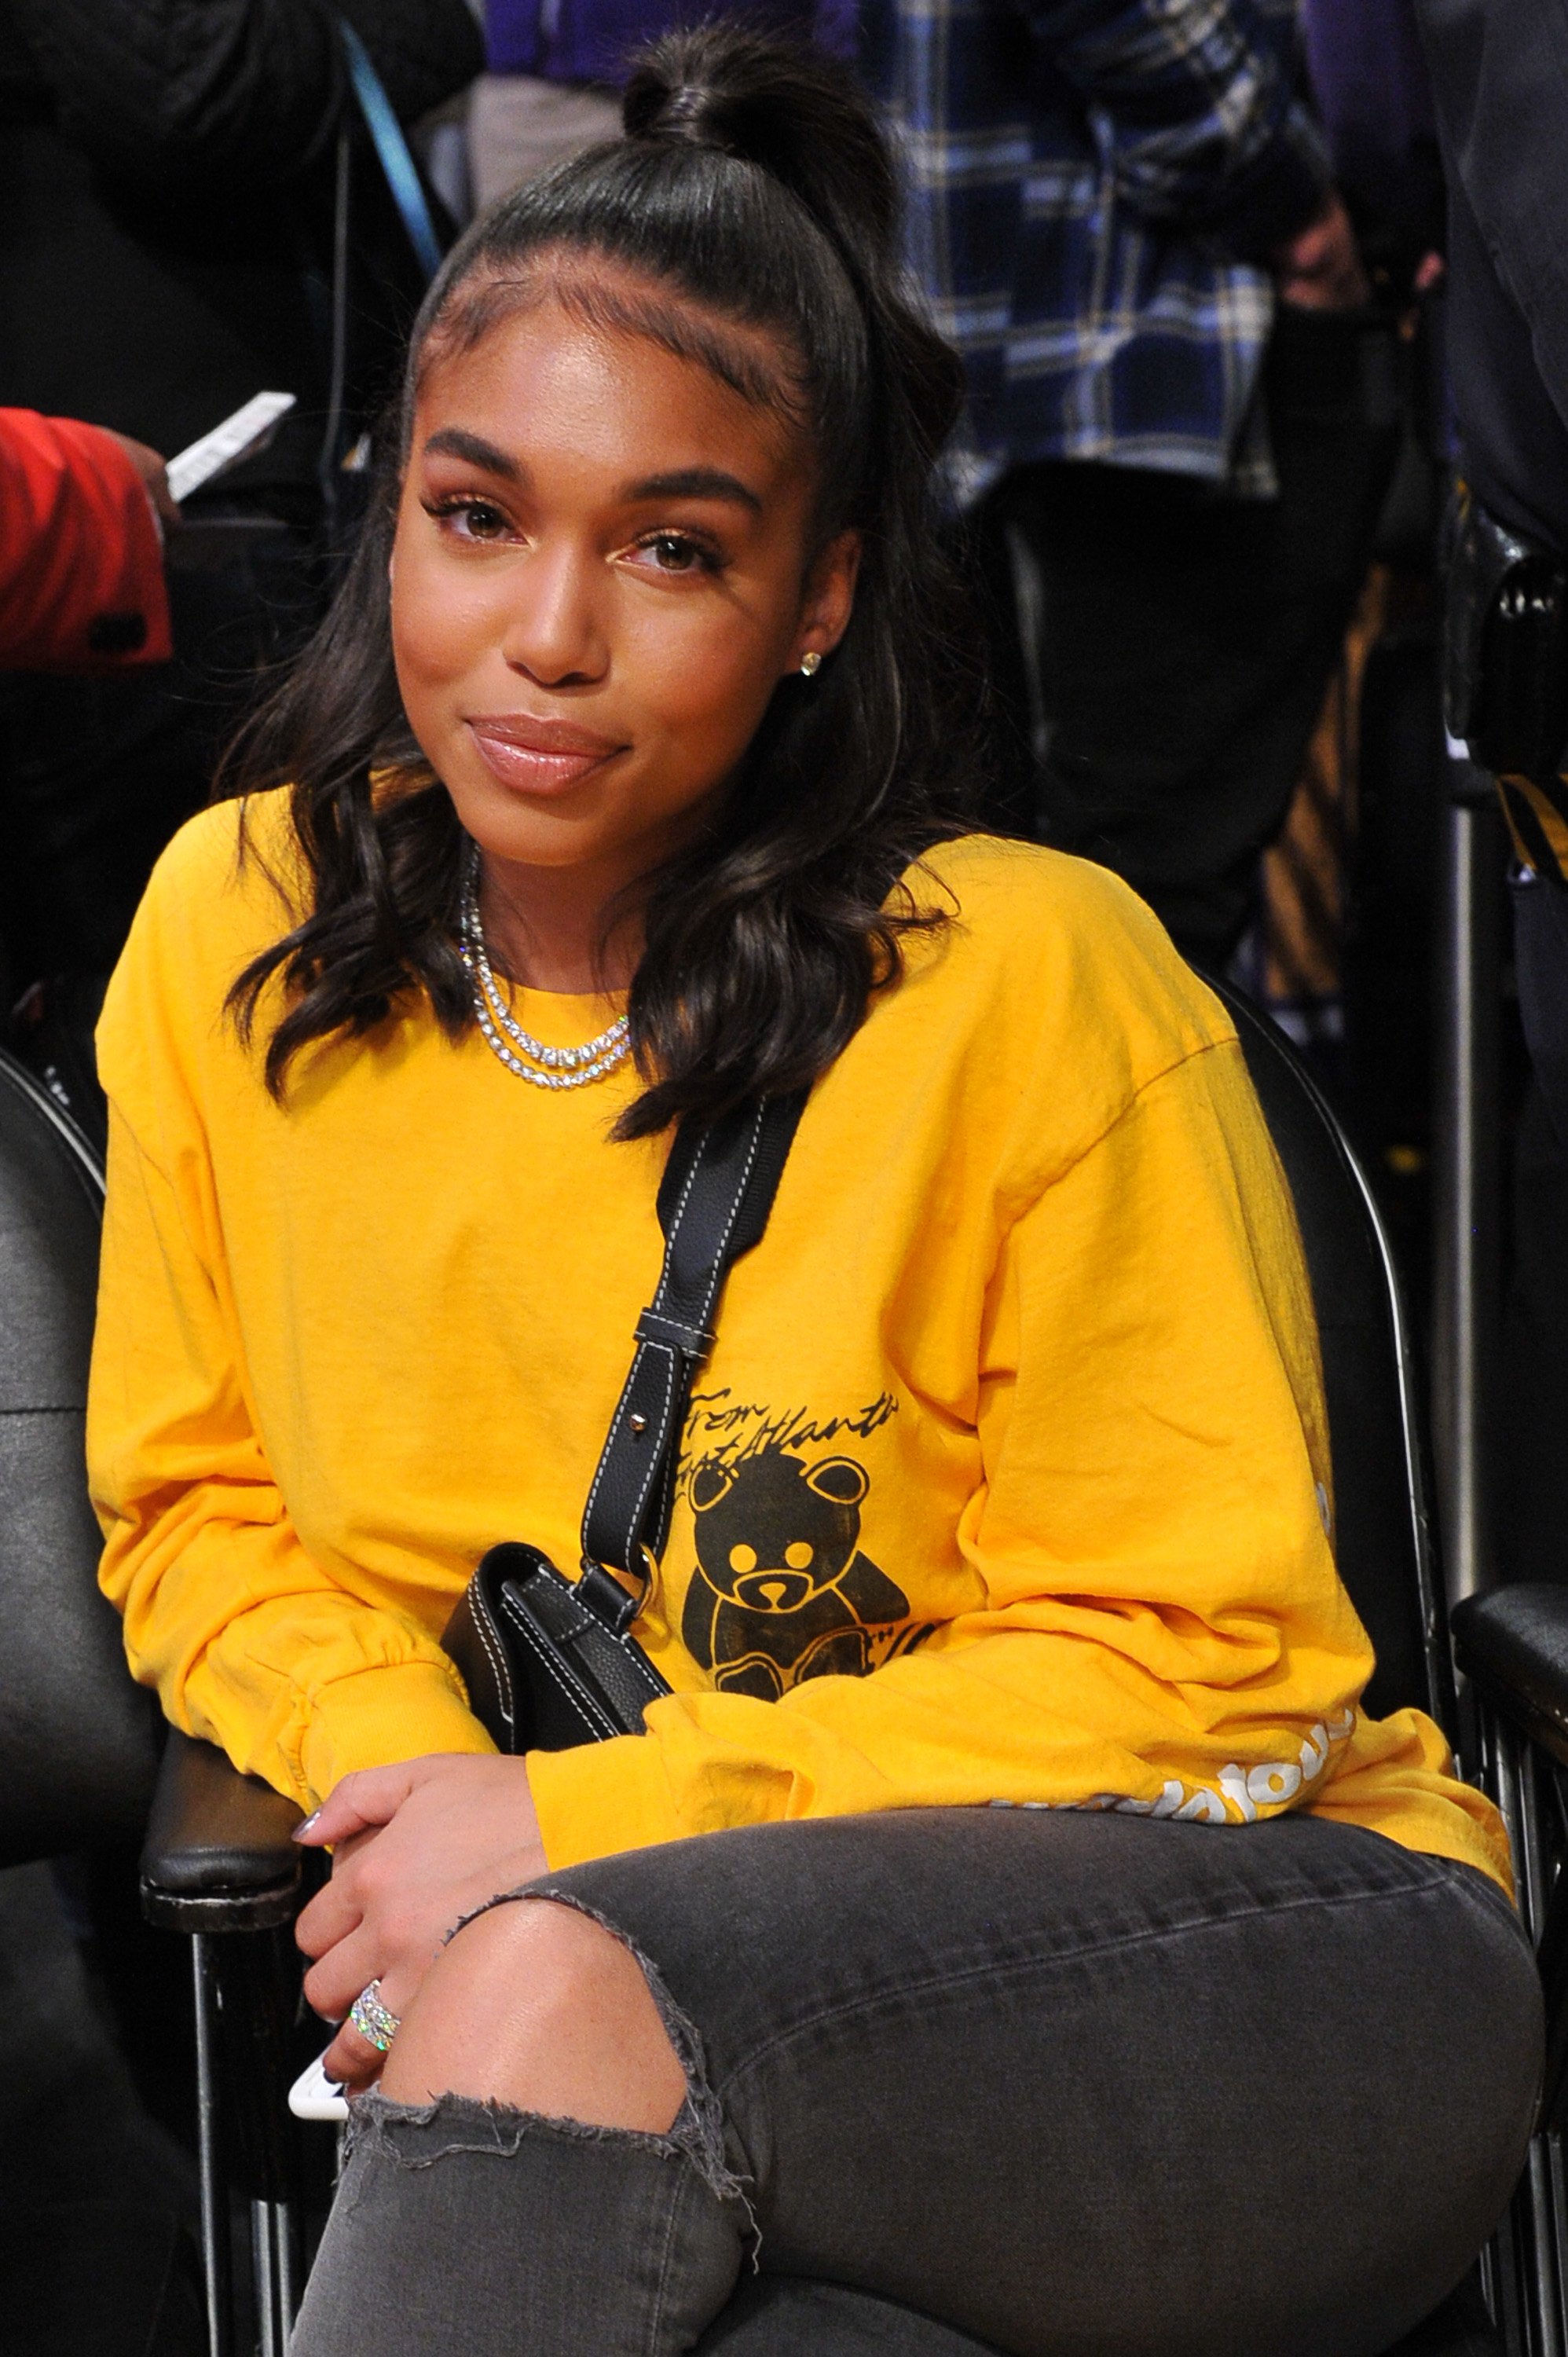 Lori Harvey at Staples Center for a basketball game between the Los Angeles Lakers and the Sacramento Kings on December 30, 2018 in Los Angeles, California.|Source: Getty Images